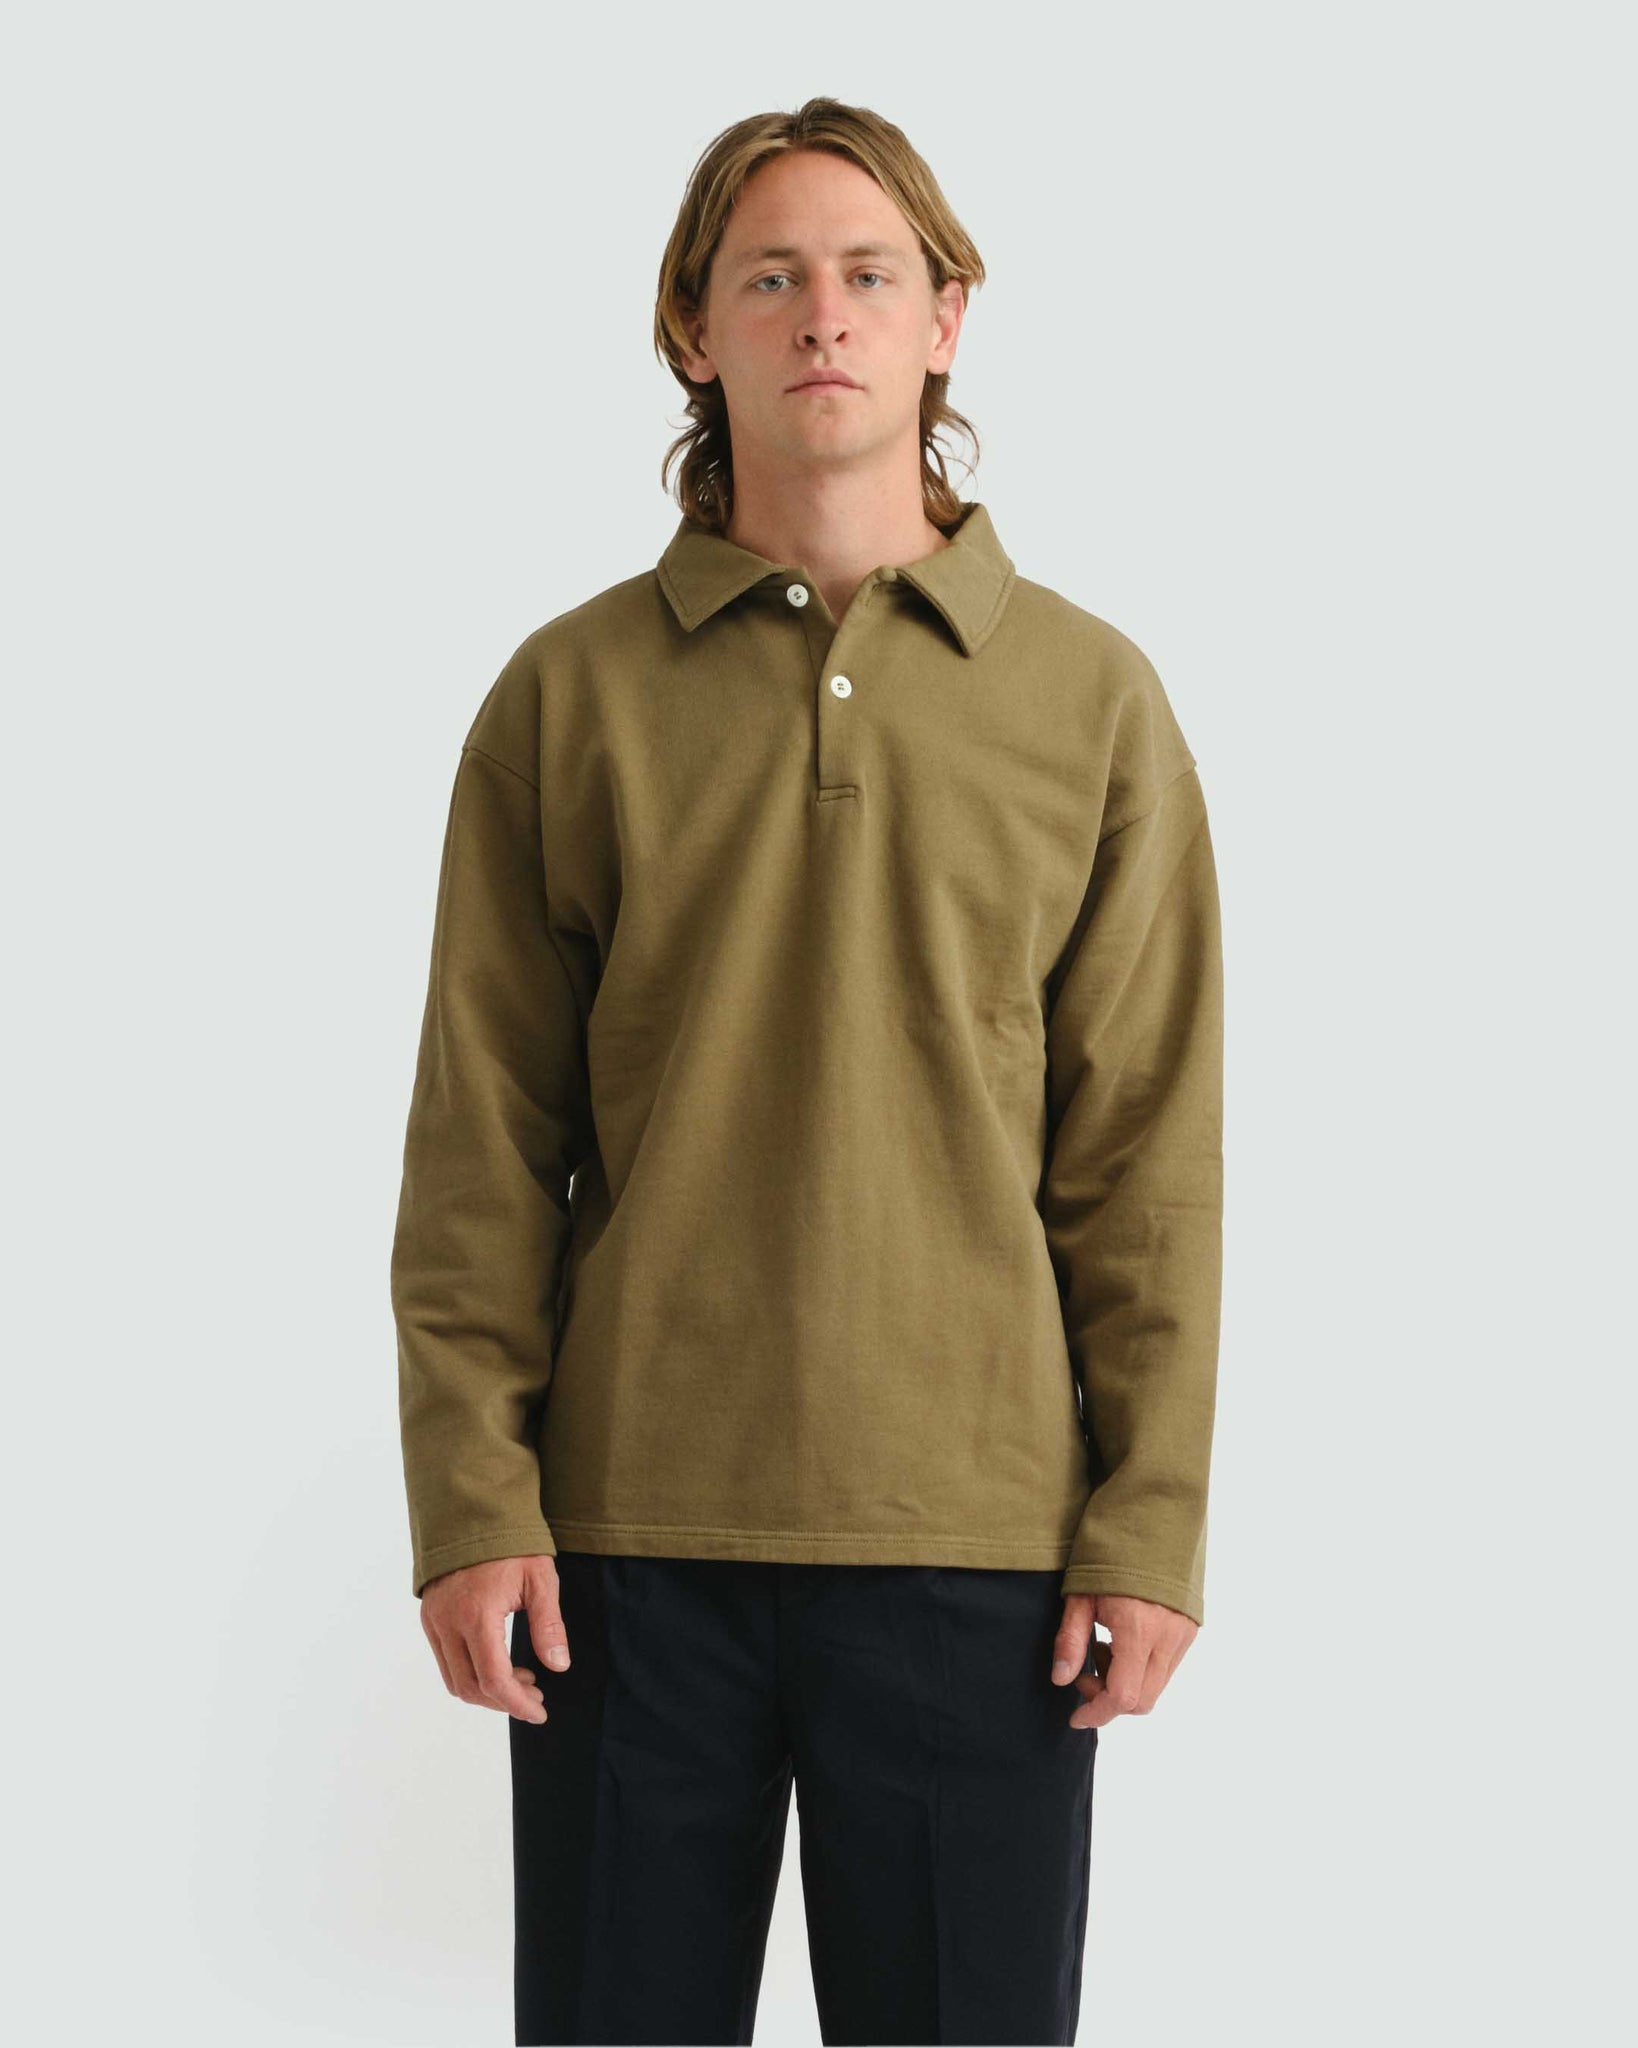 Another Polo Shirt 1.0 - Forest Green